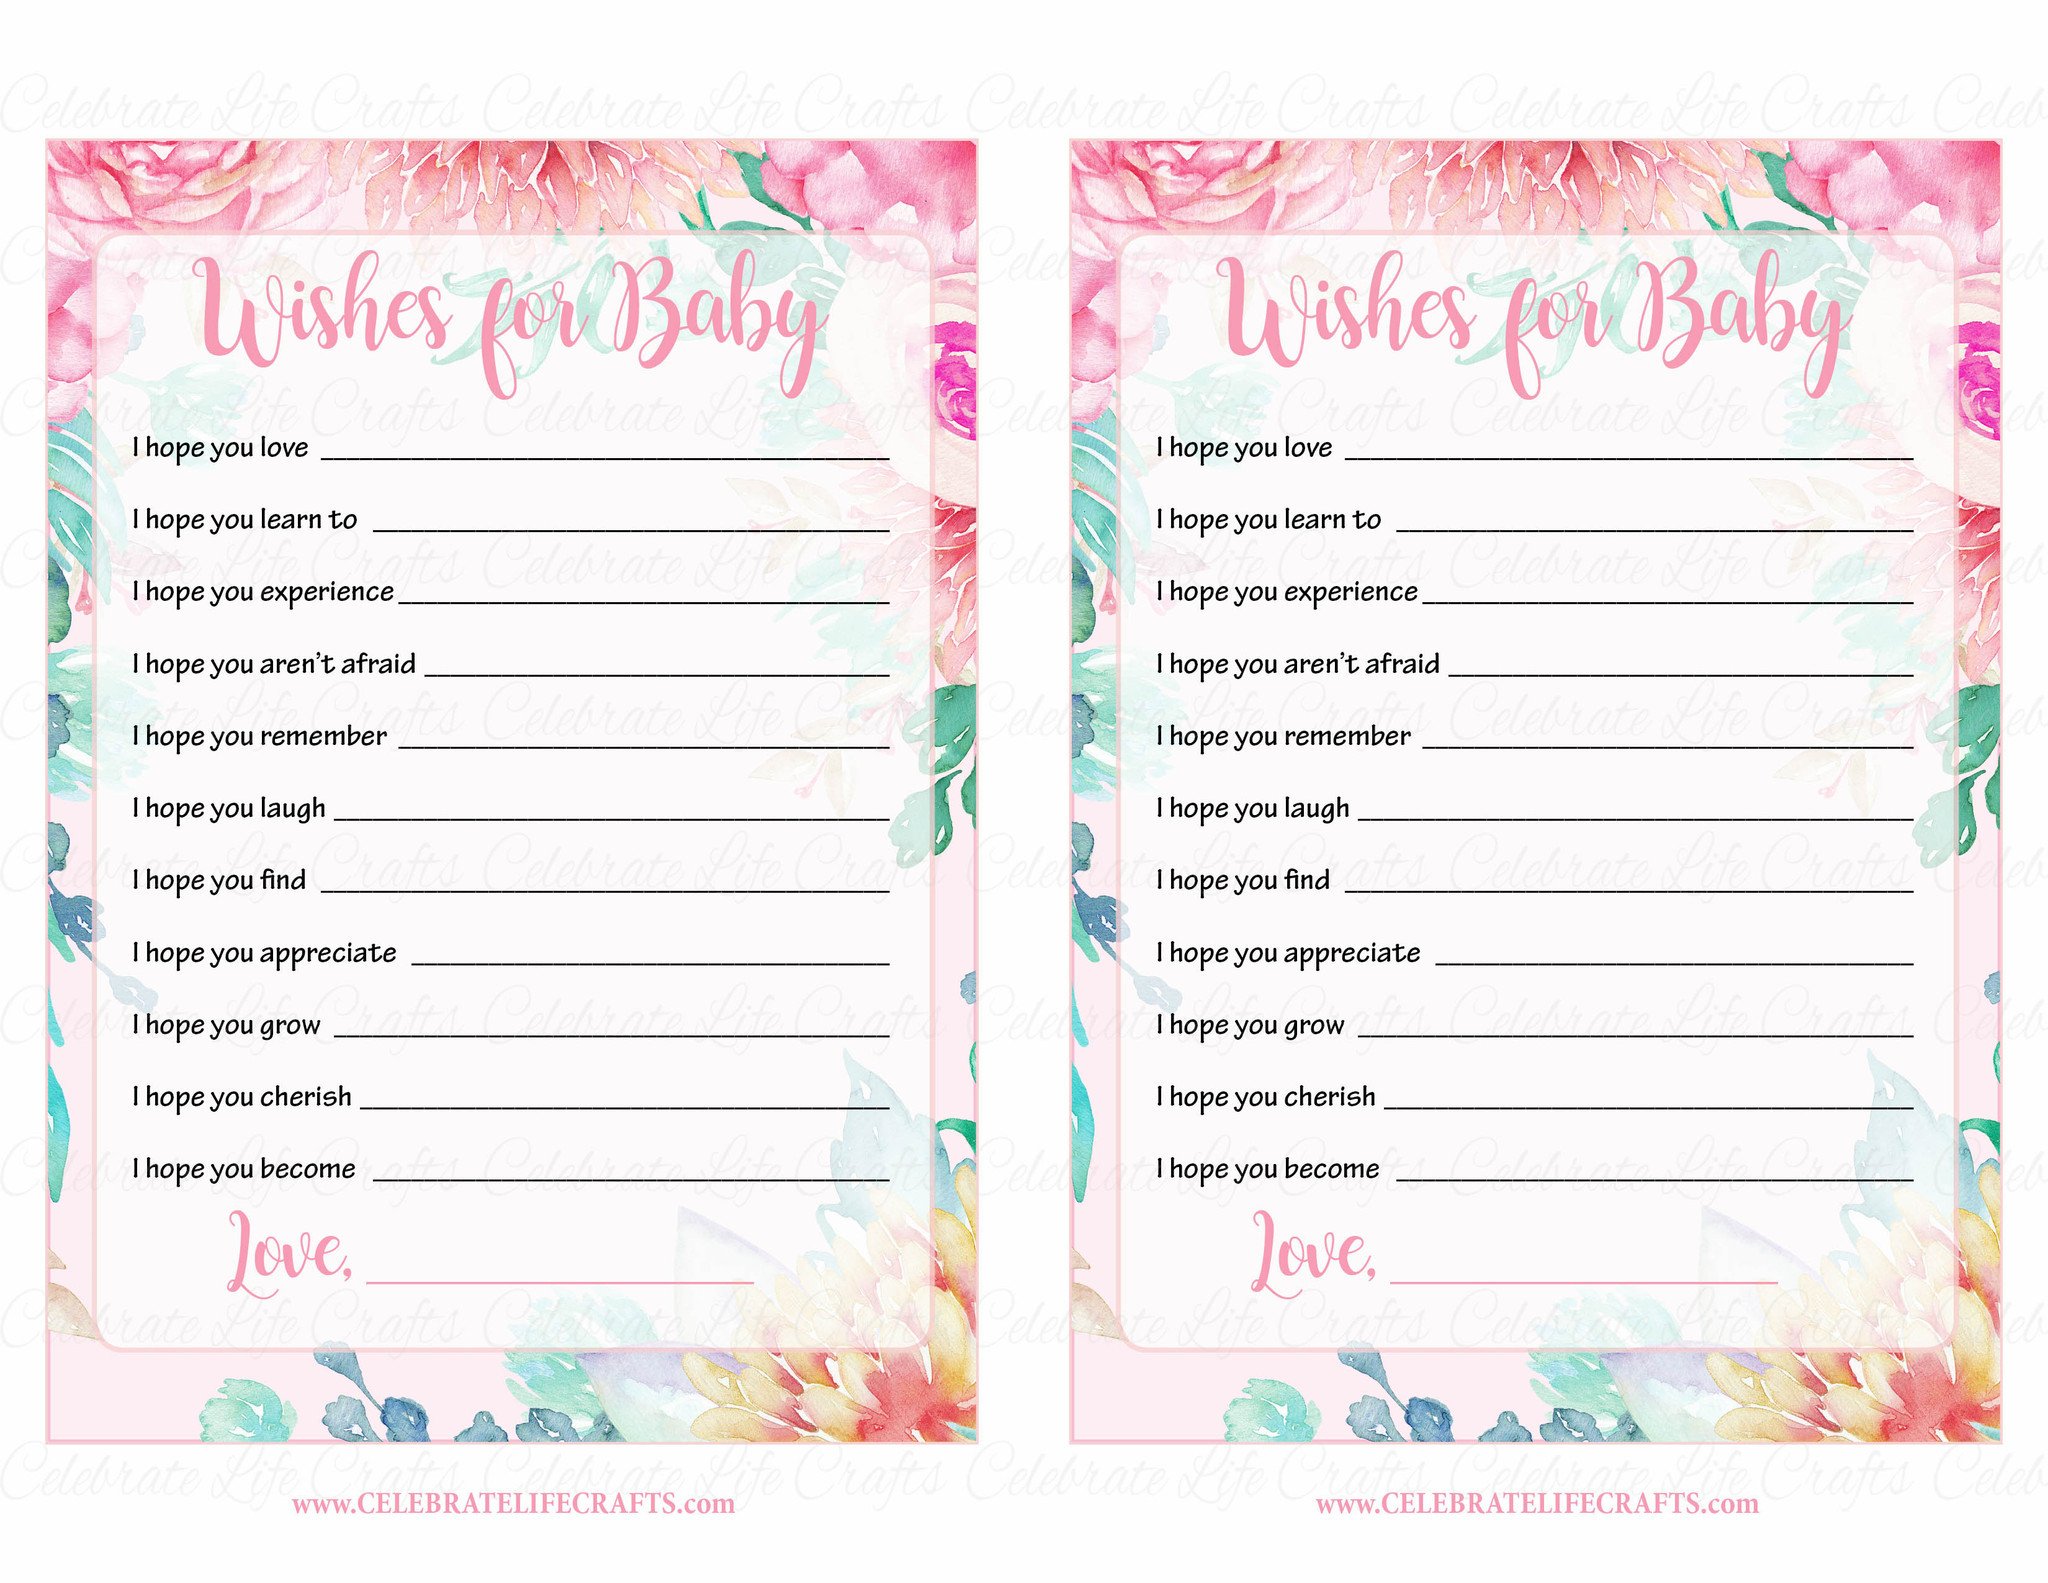 Full Size of Baby Shower:stylish Baby Shower Wishes Picture Inspirations Baby Shower Wishes Wishes For Baby Cards Printable Download Pink Floral Spring Baby Shower Activity B33001